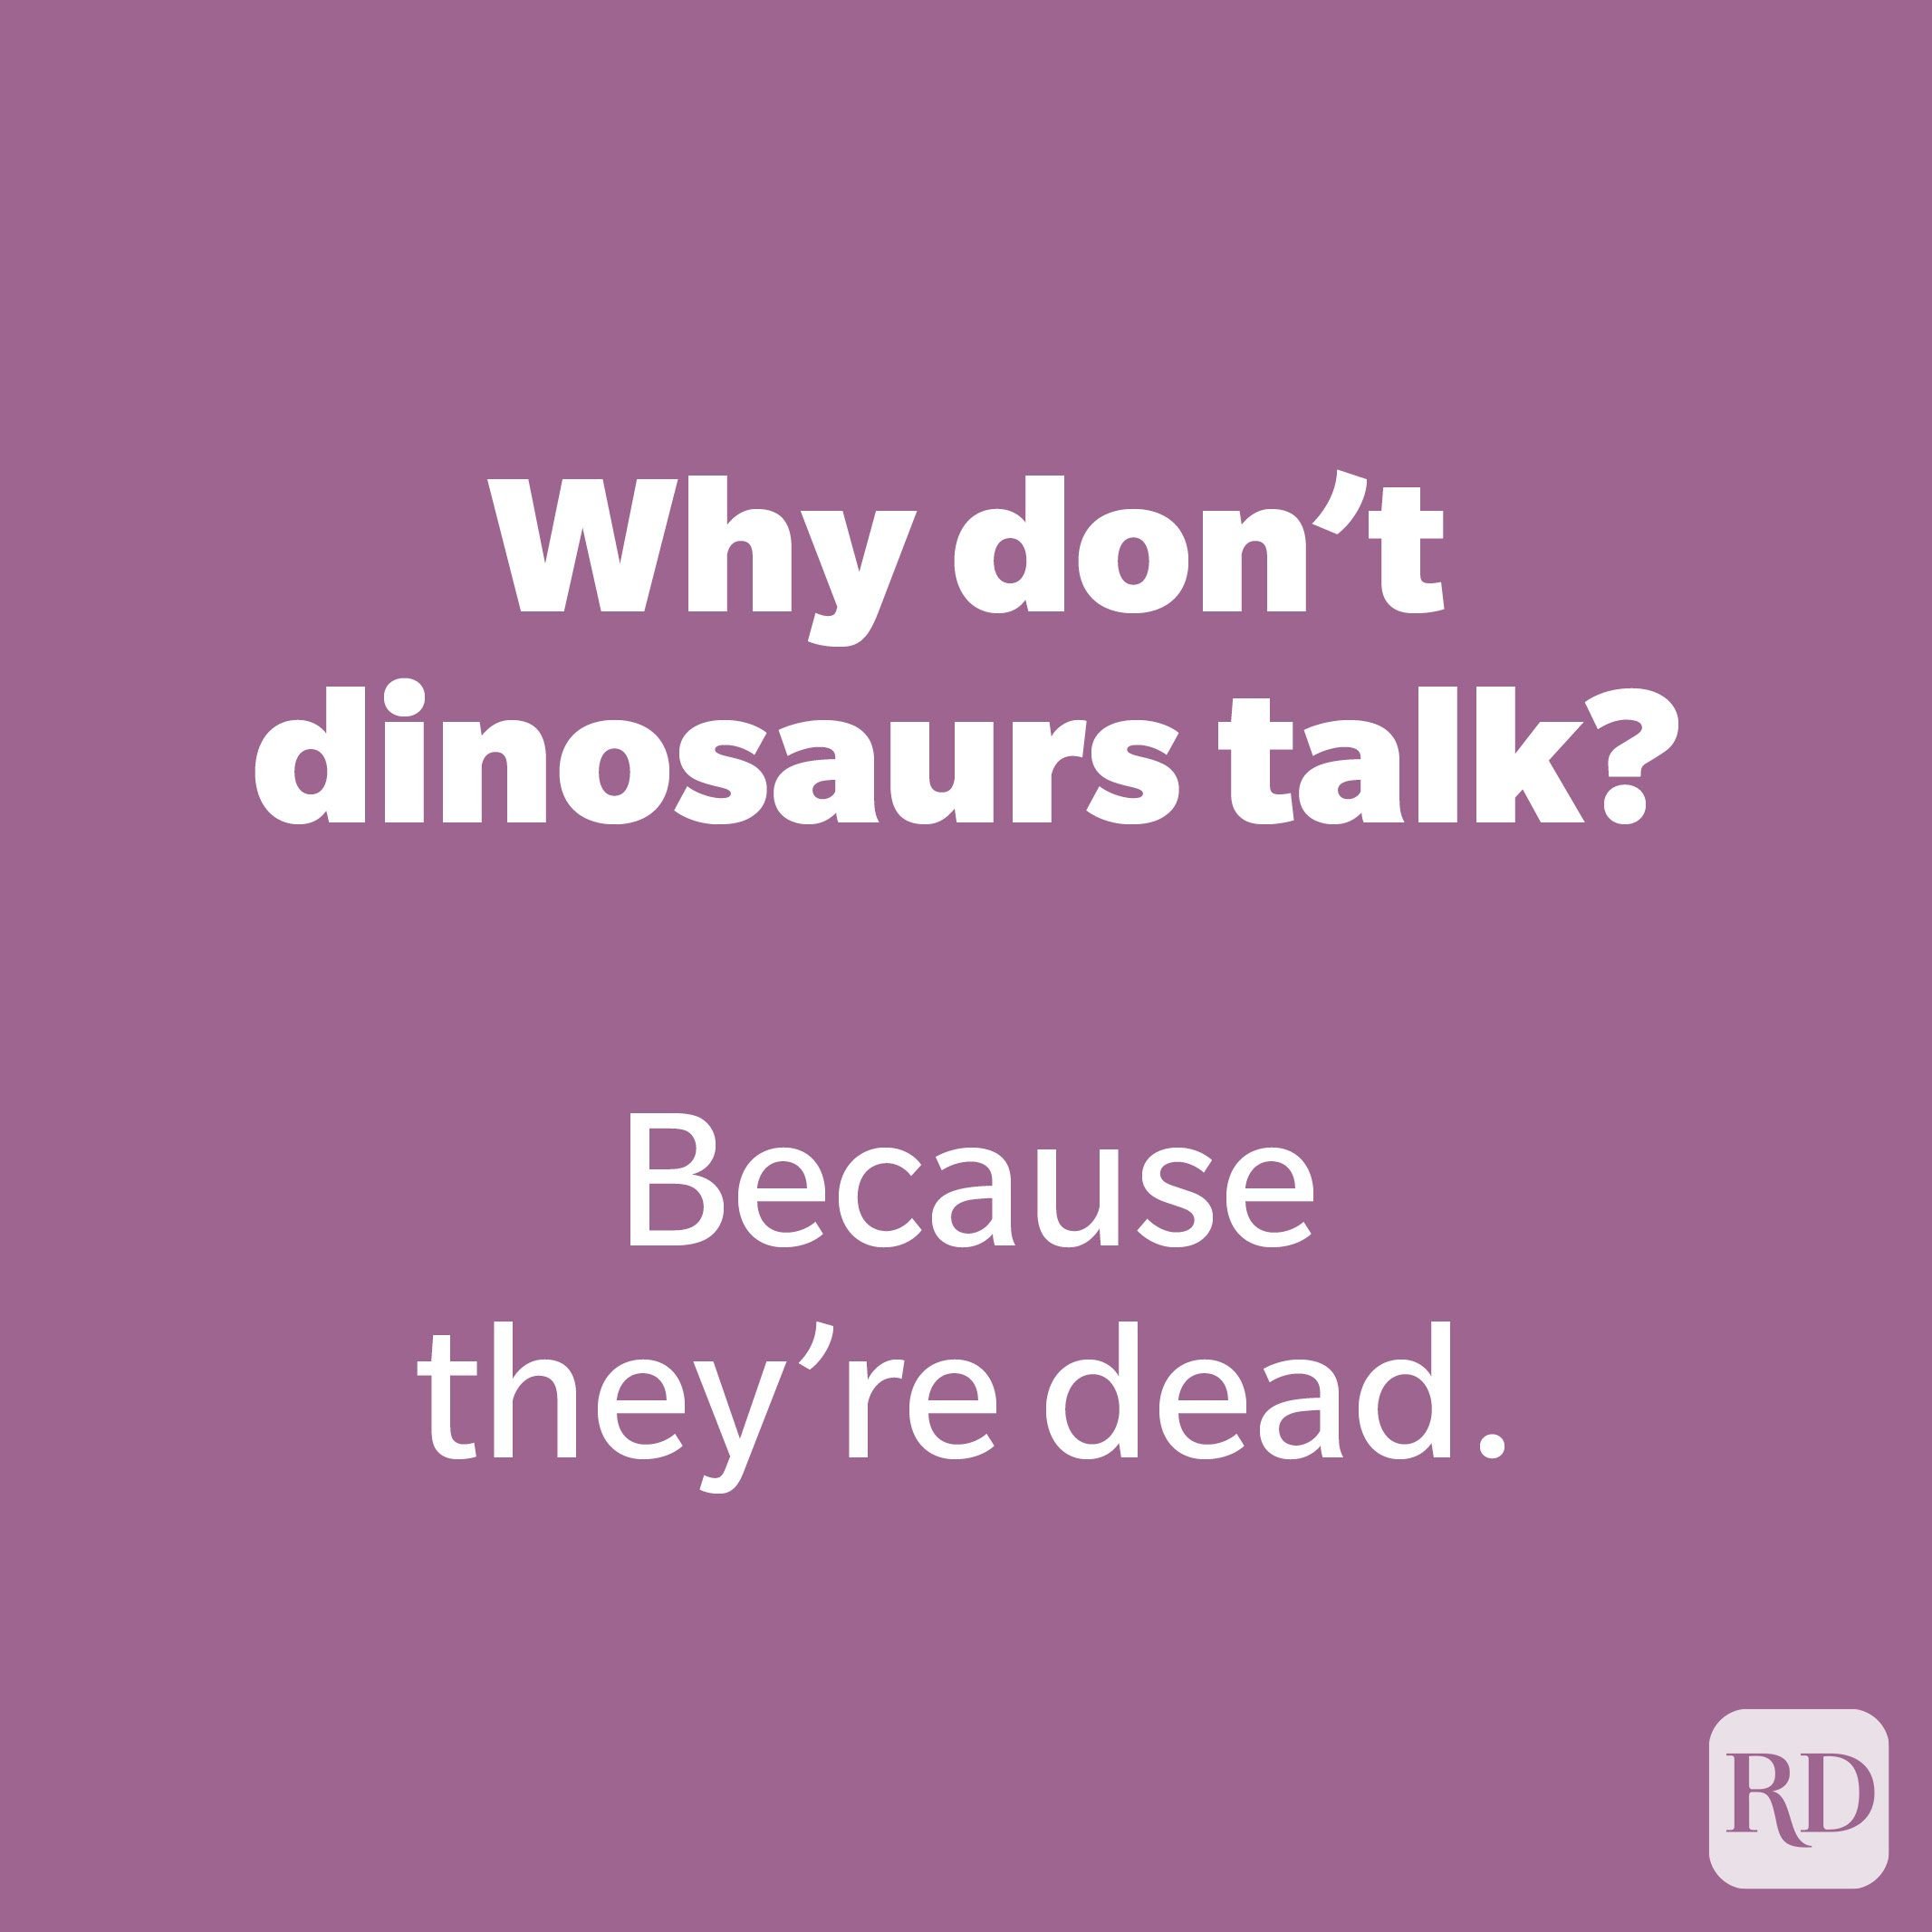 Why don't dinosaurs talk?